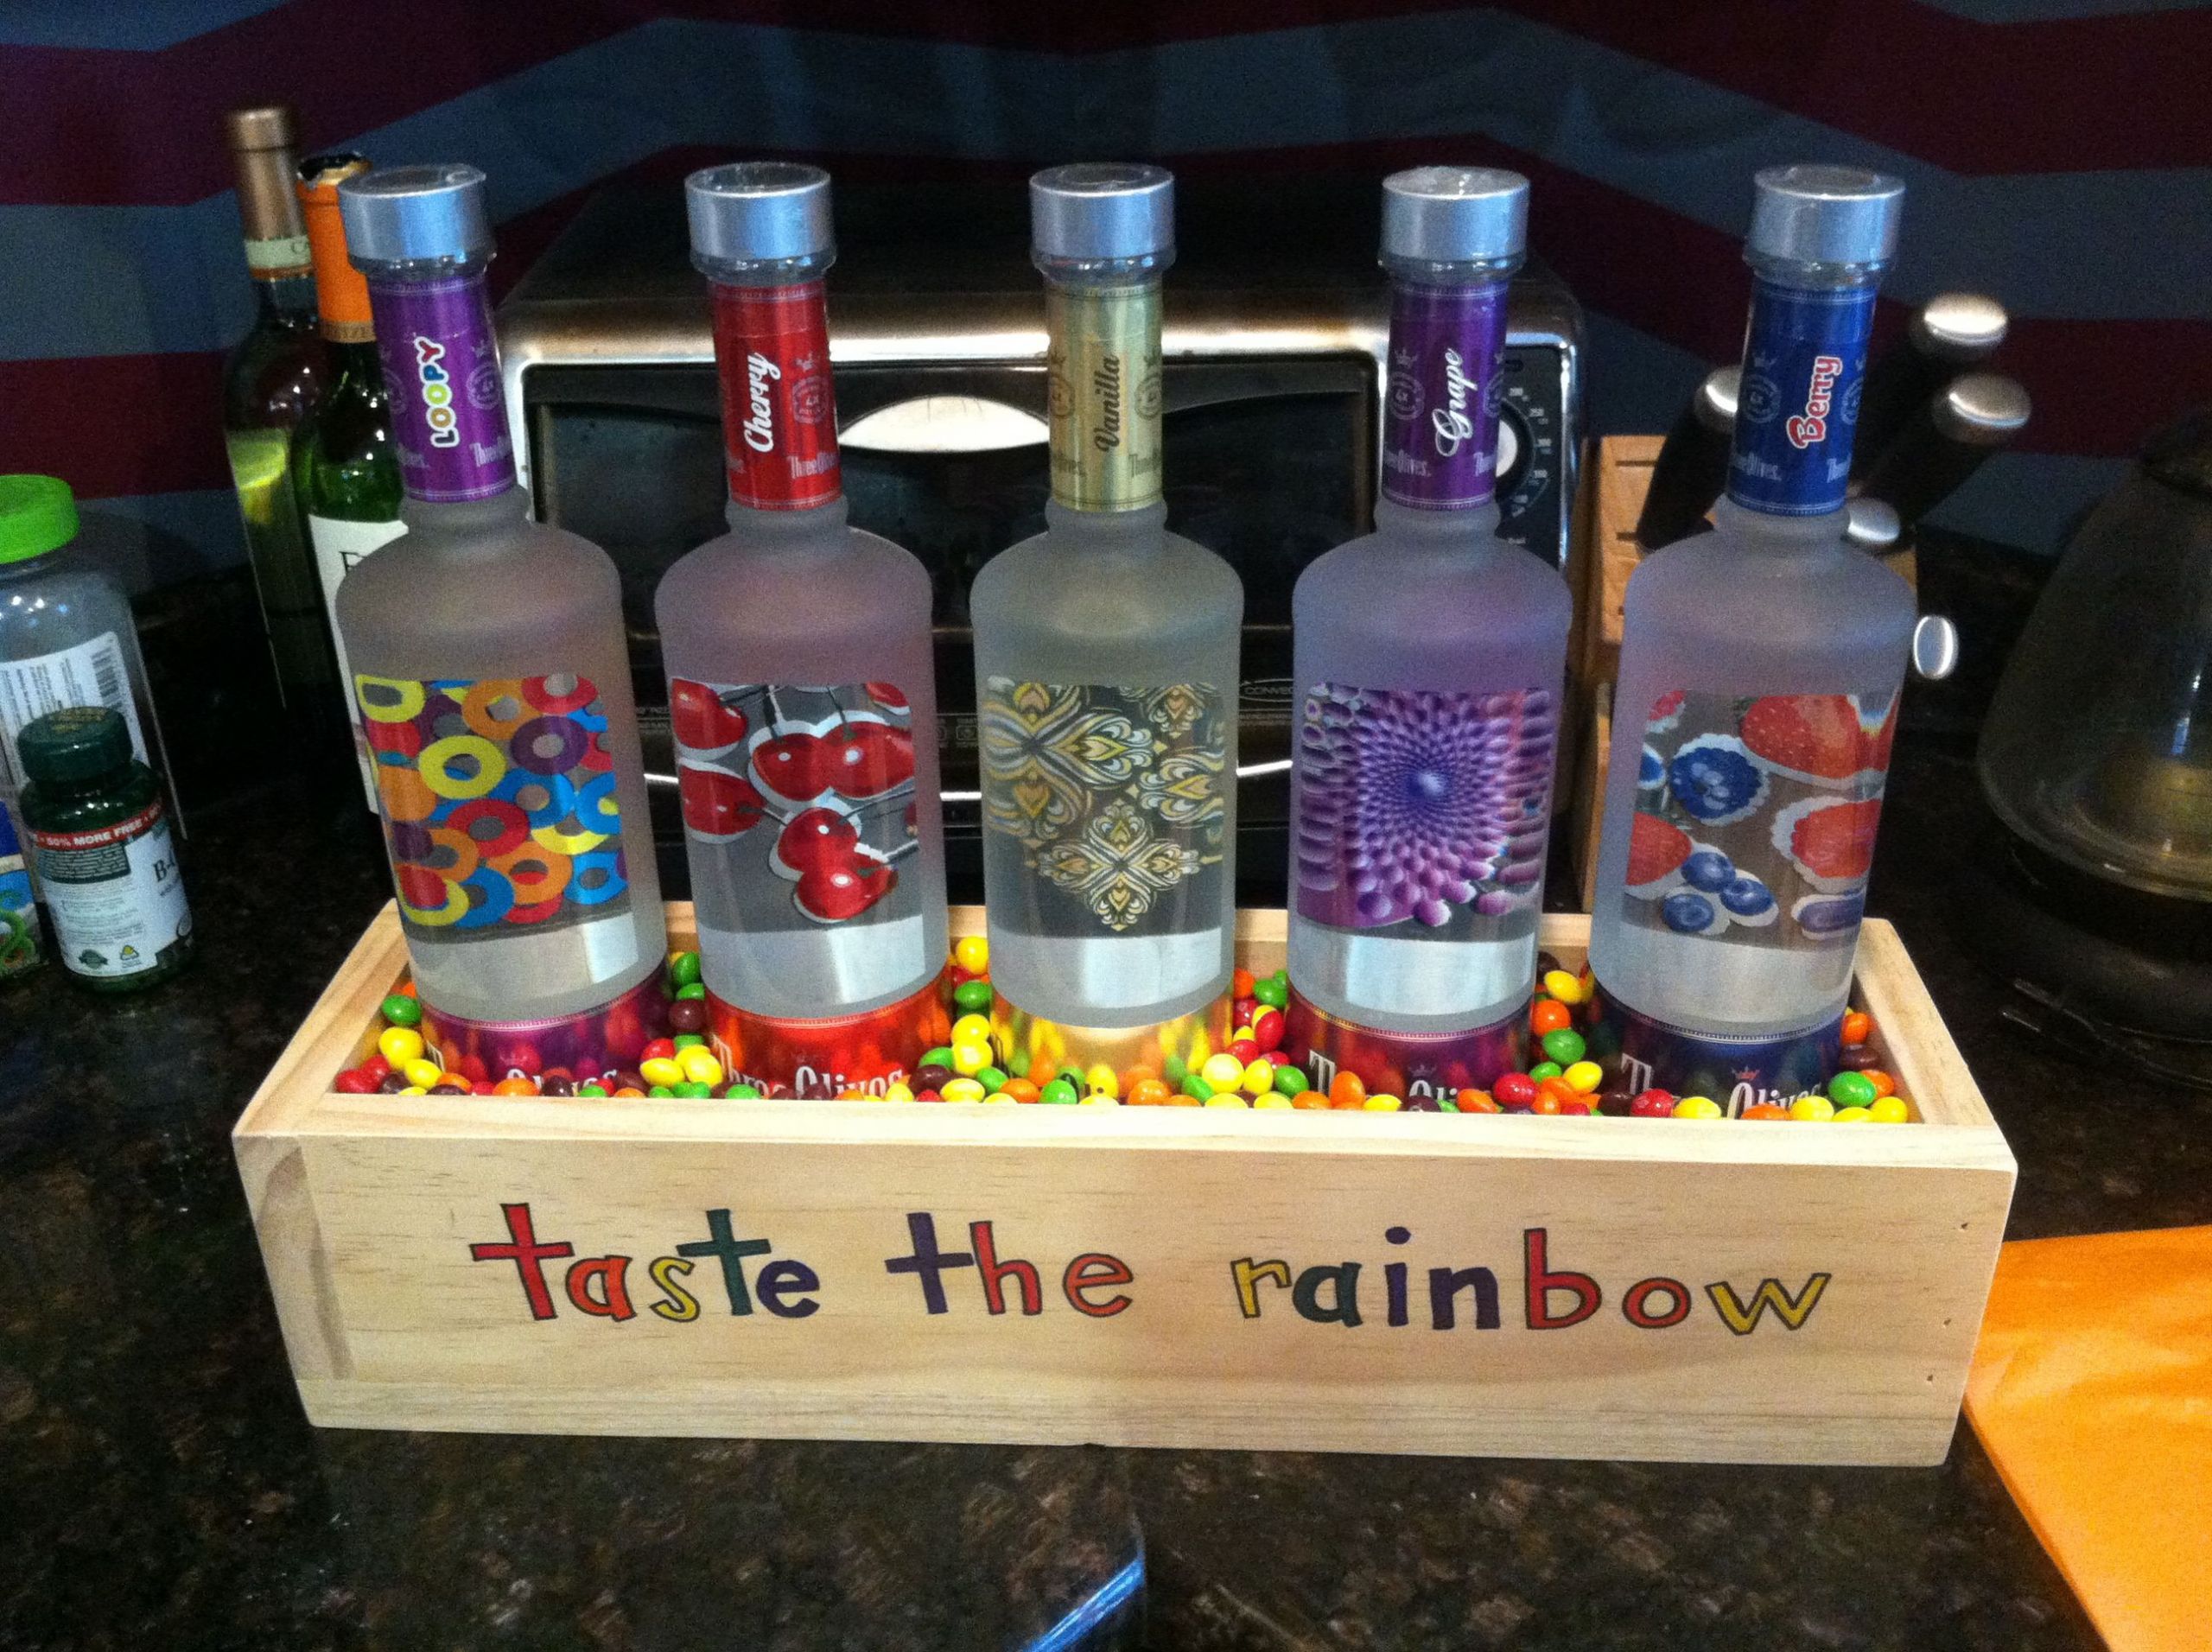 Vodka Gift Basket Ideas
 Pin by April Ricci on Fundraising Ideas